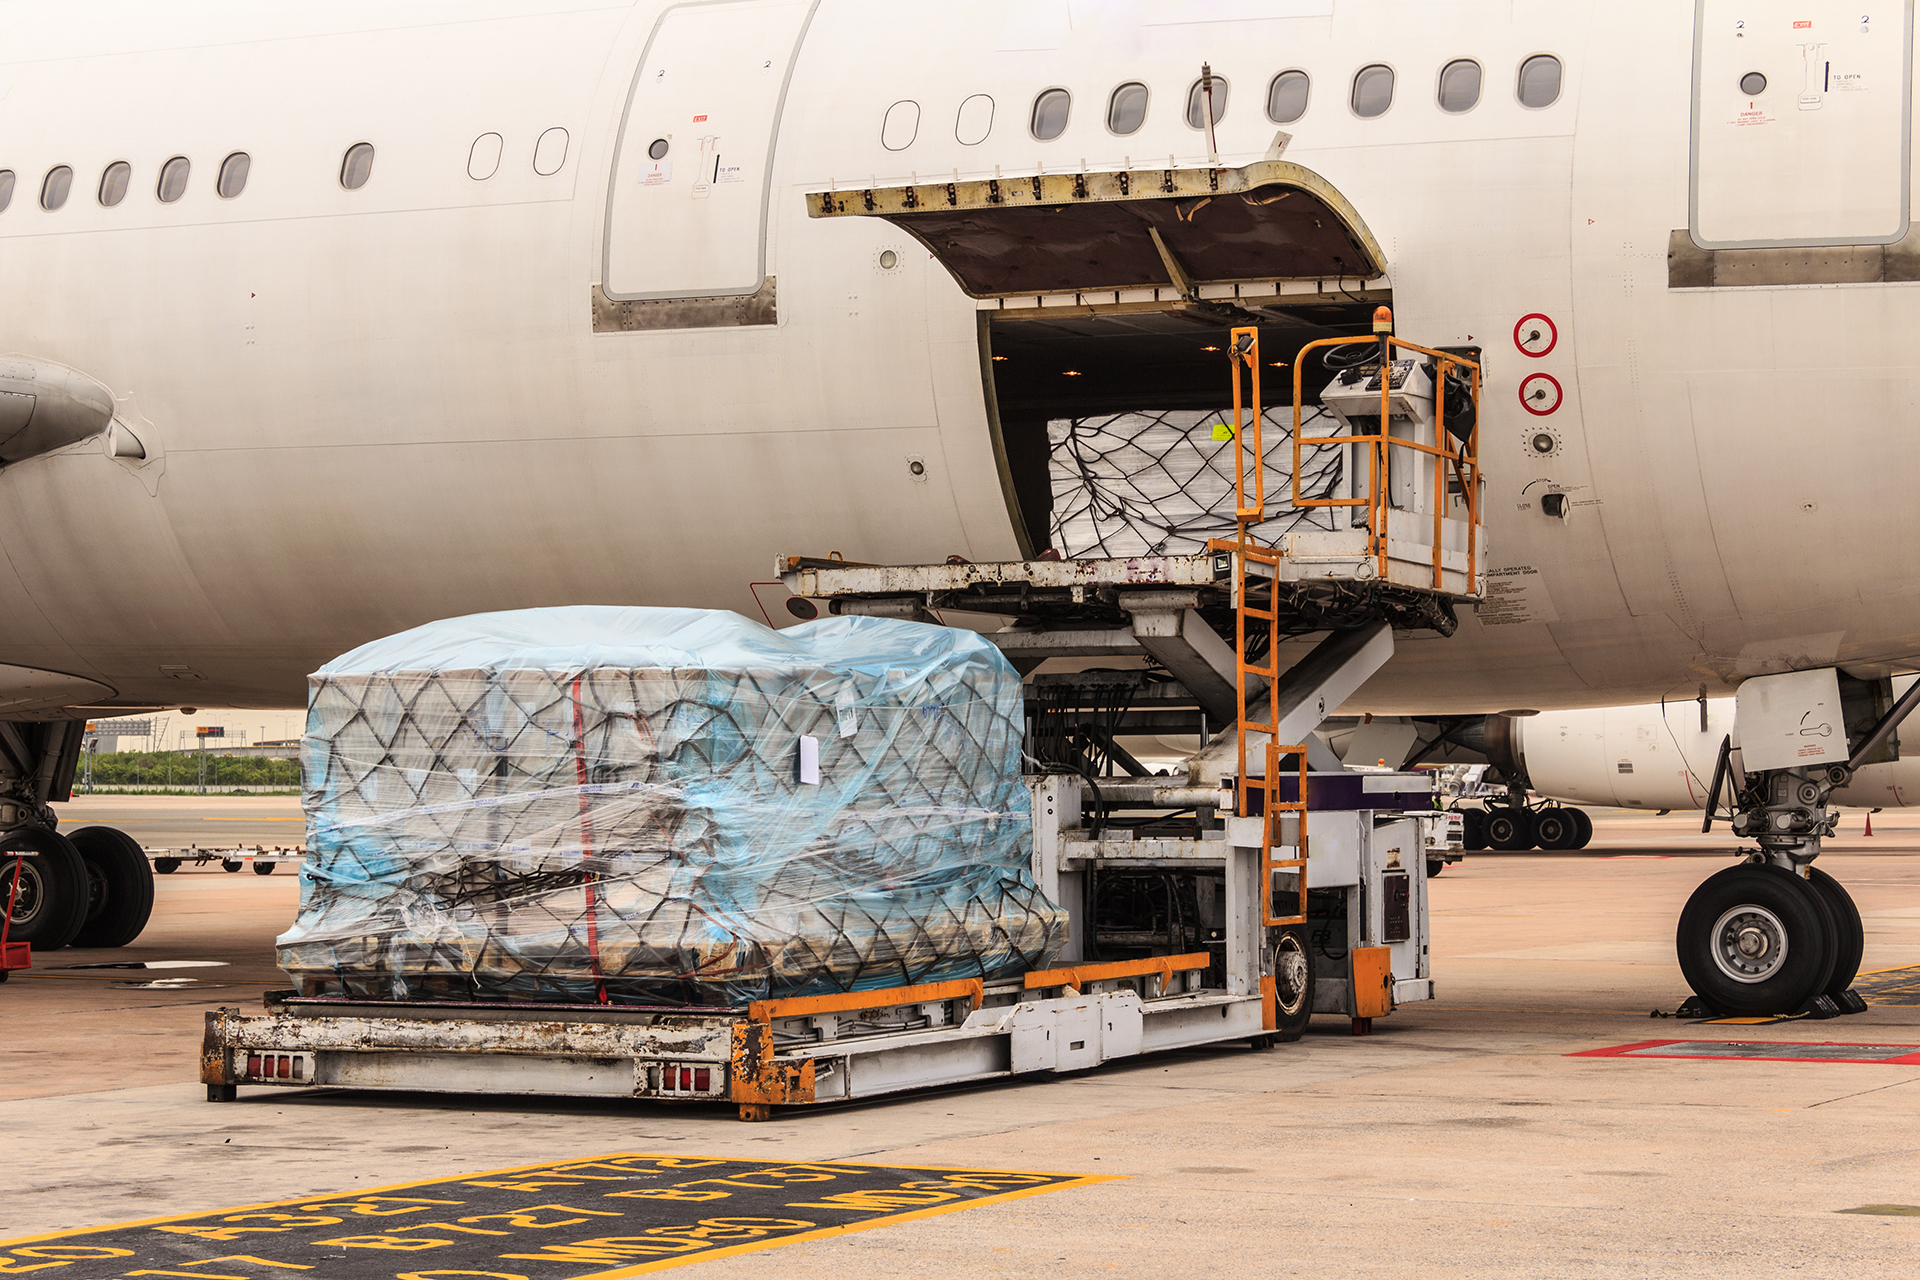 Fall in Air Cargo Demand in line with Expectations